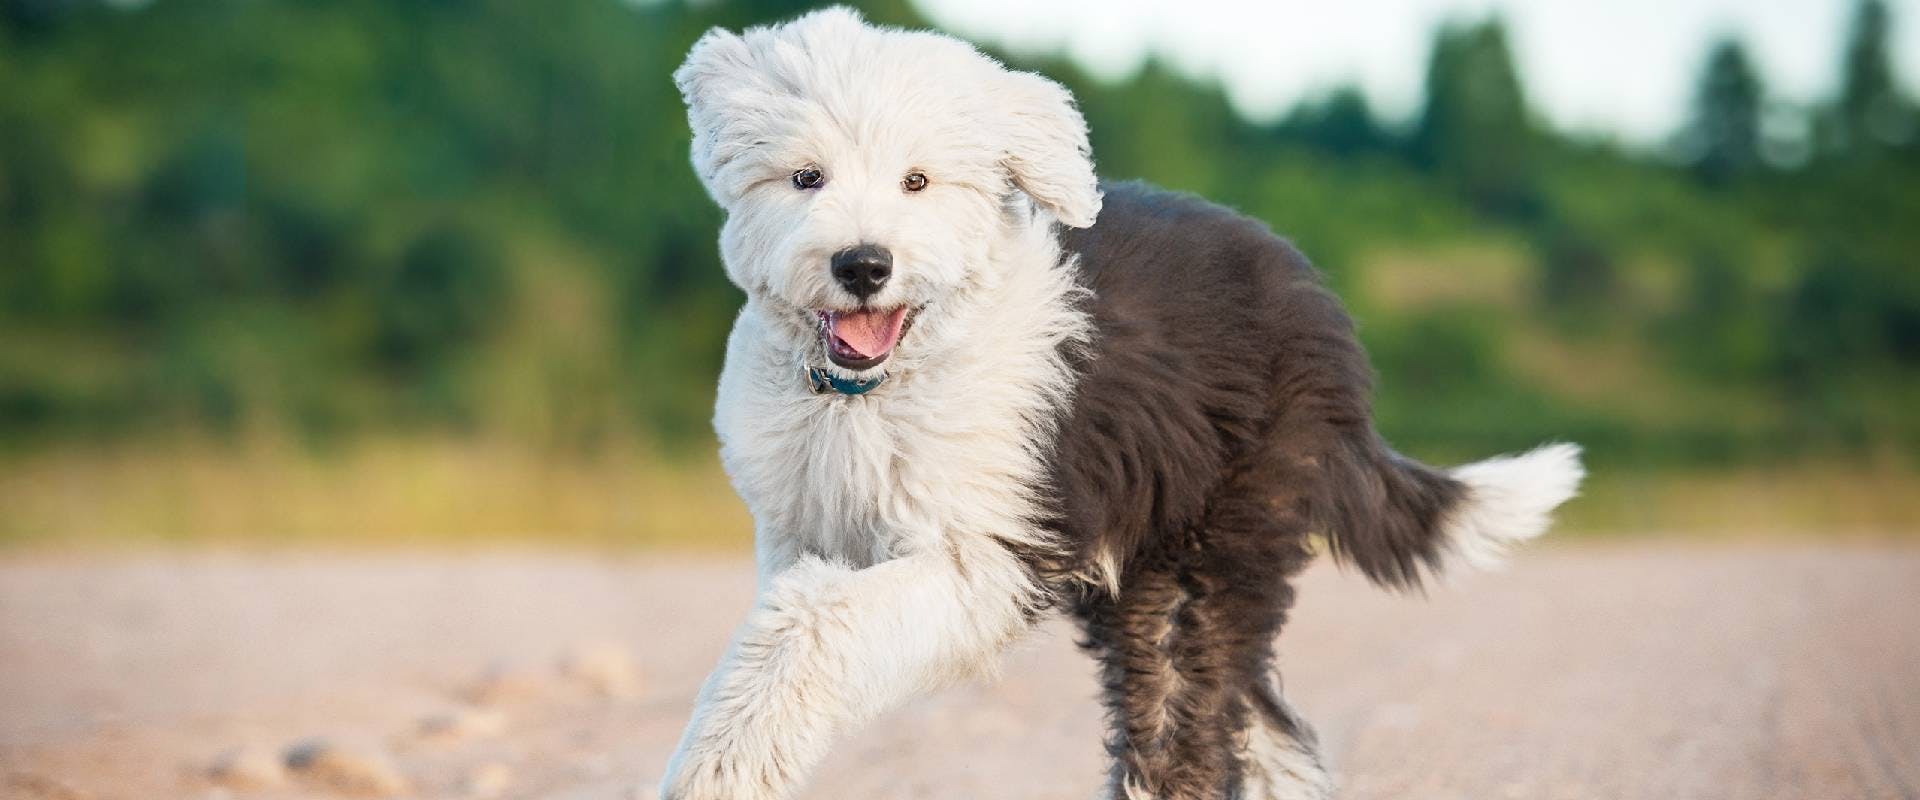 Old English Sheepdog running on sand with a green background